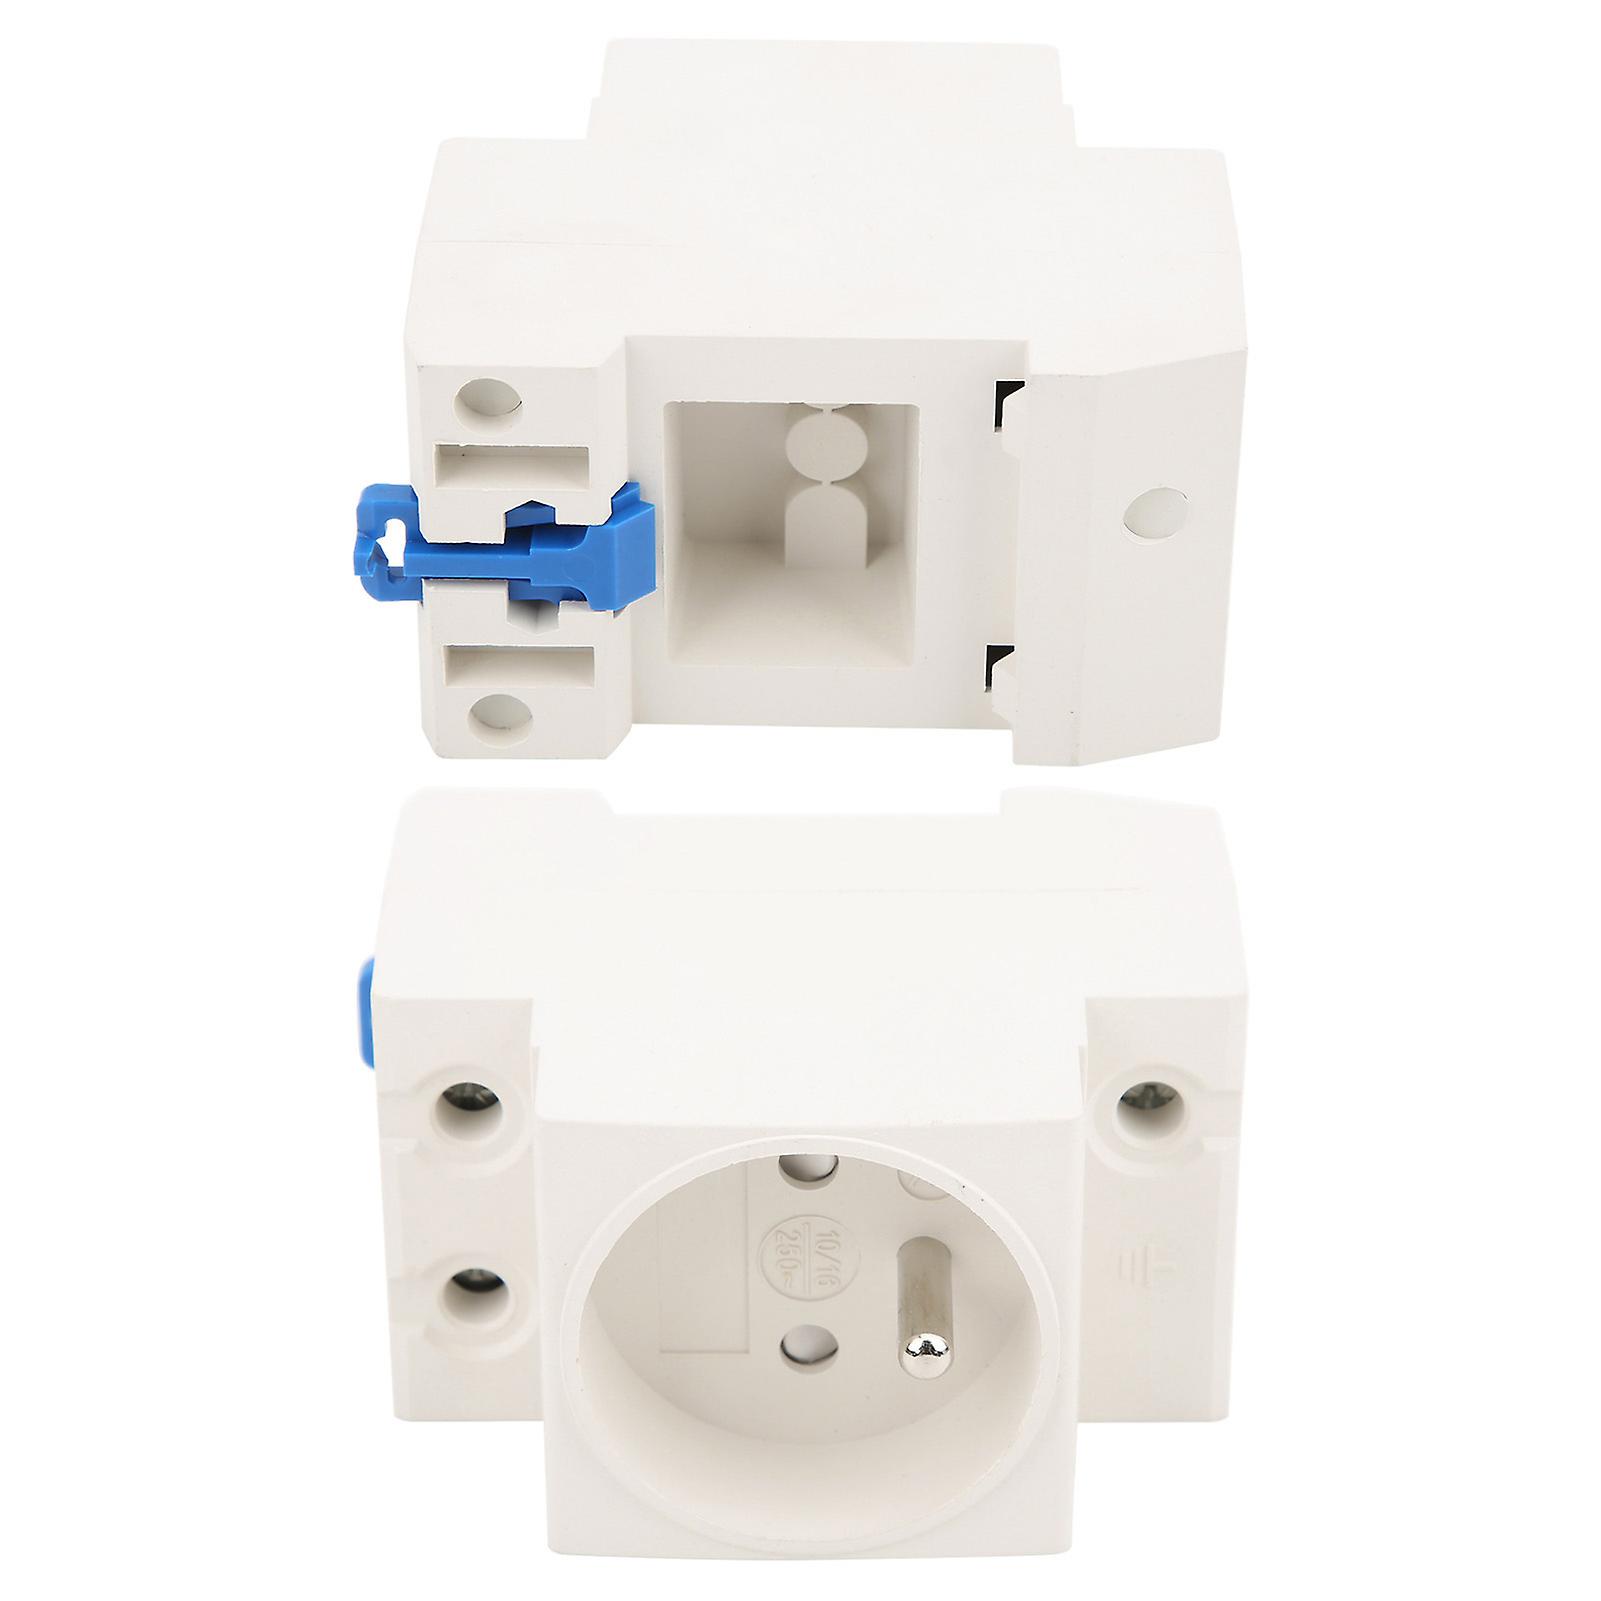 2pcs Power Socket Electrical Rail Adapter Outlet Industrial Connector Fr Plug Ac250v 1016a